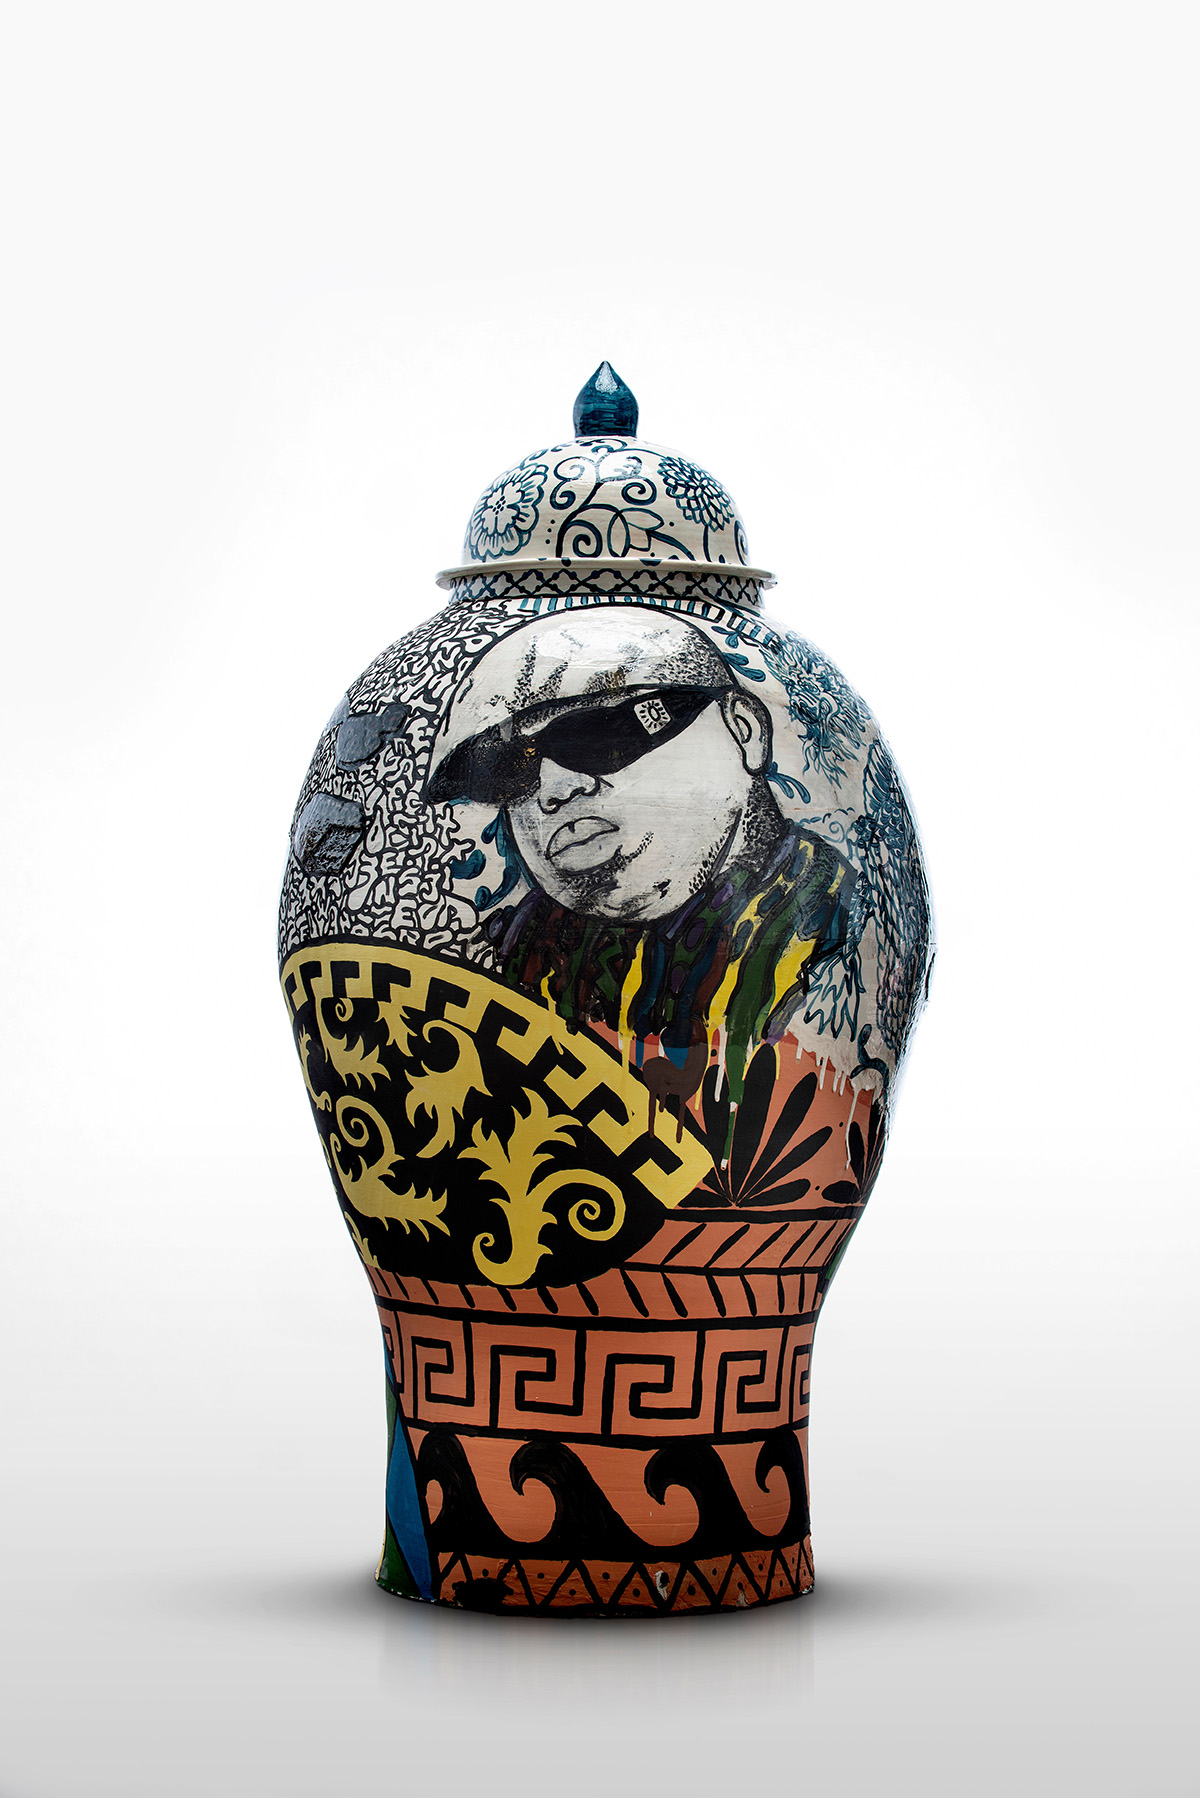 A white, blue, black, orange, and yellow glazed ceramic urn with many overlapping patterns. A man in a hat and sunglasses, the Notorious B.I.G. or Biggie, is featured.